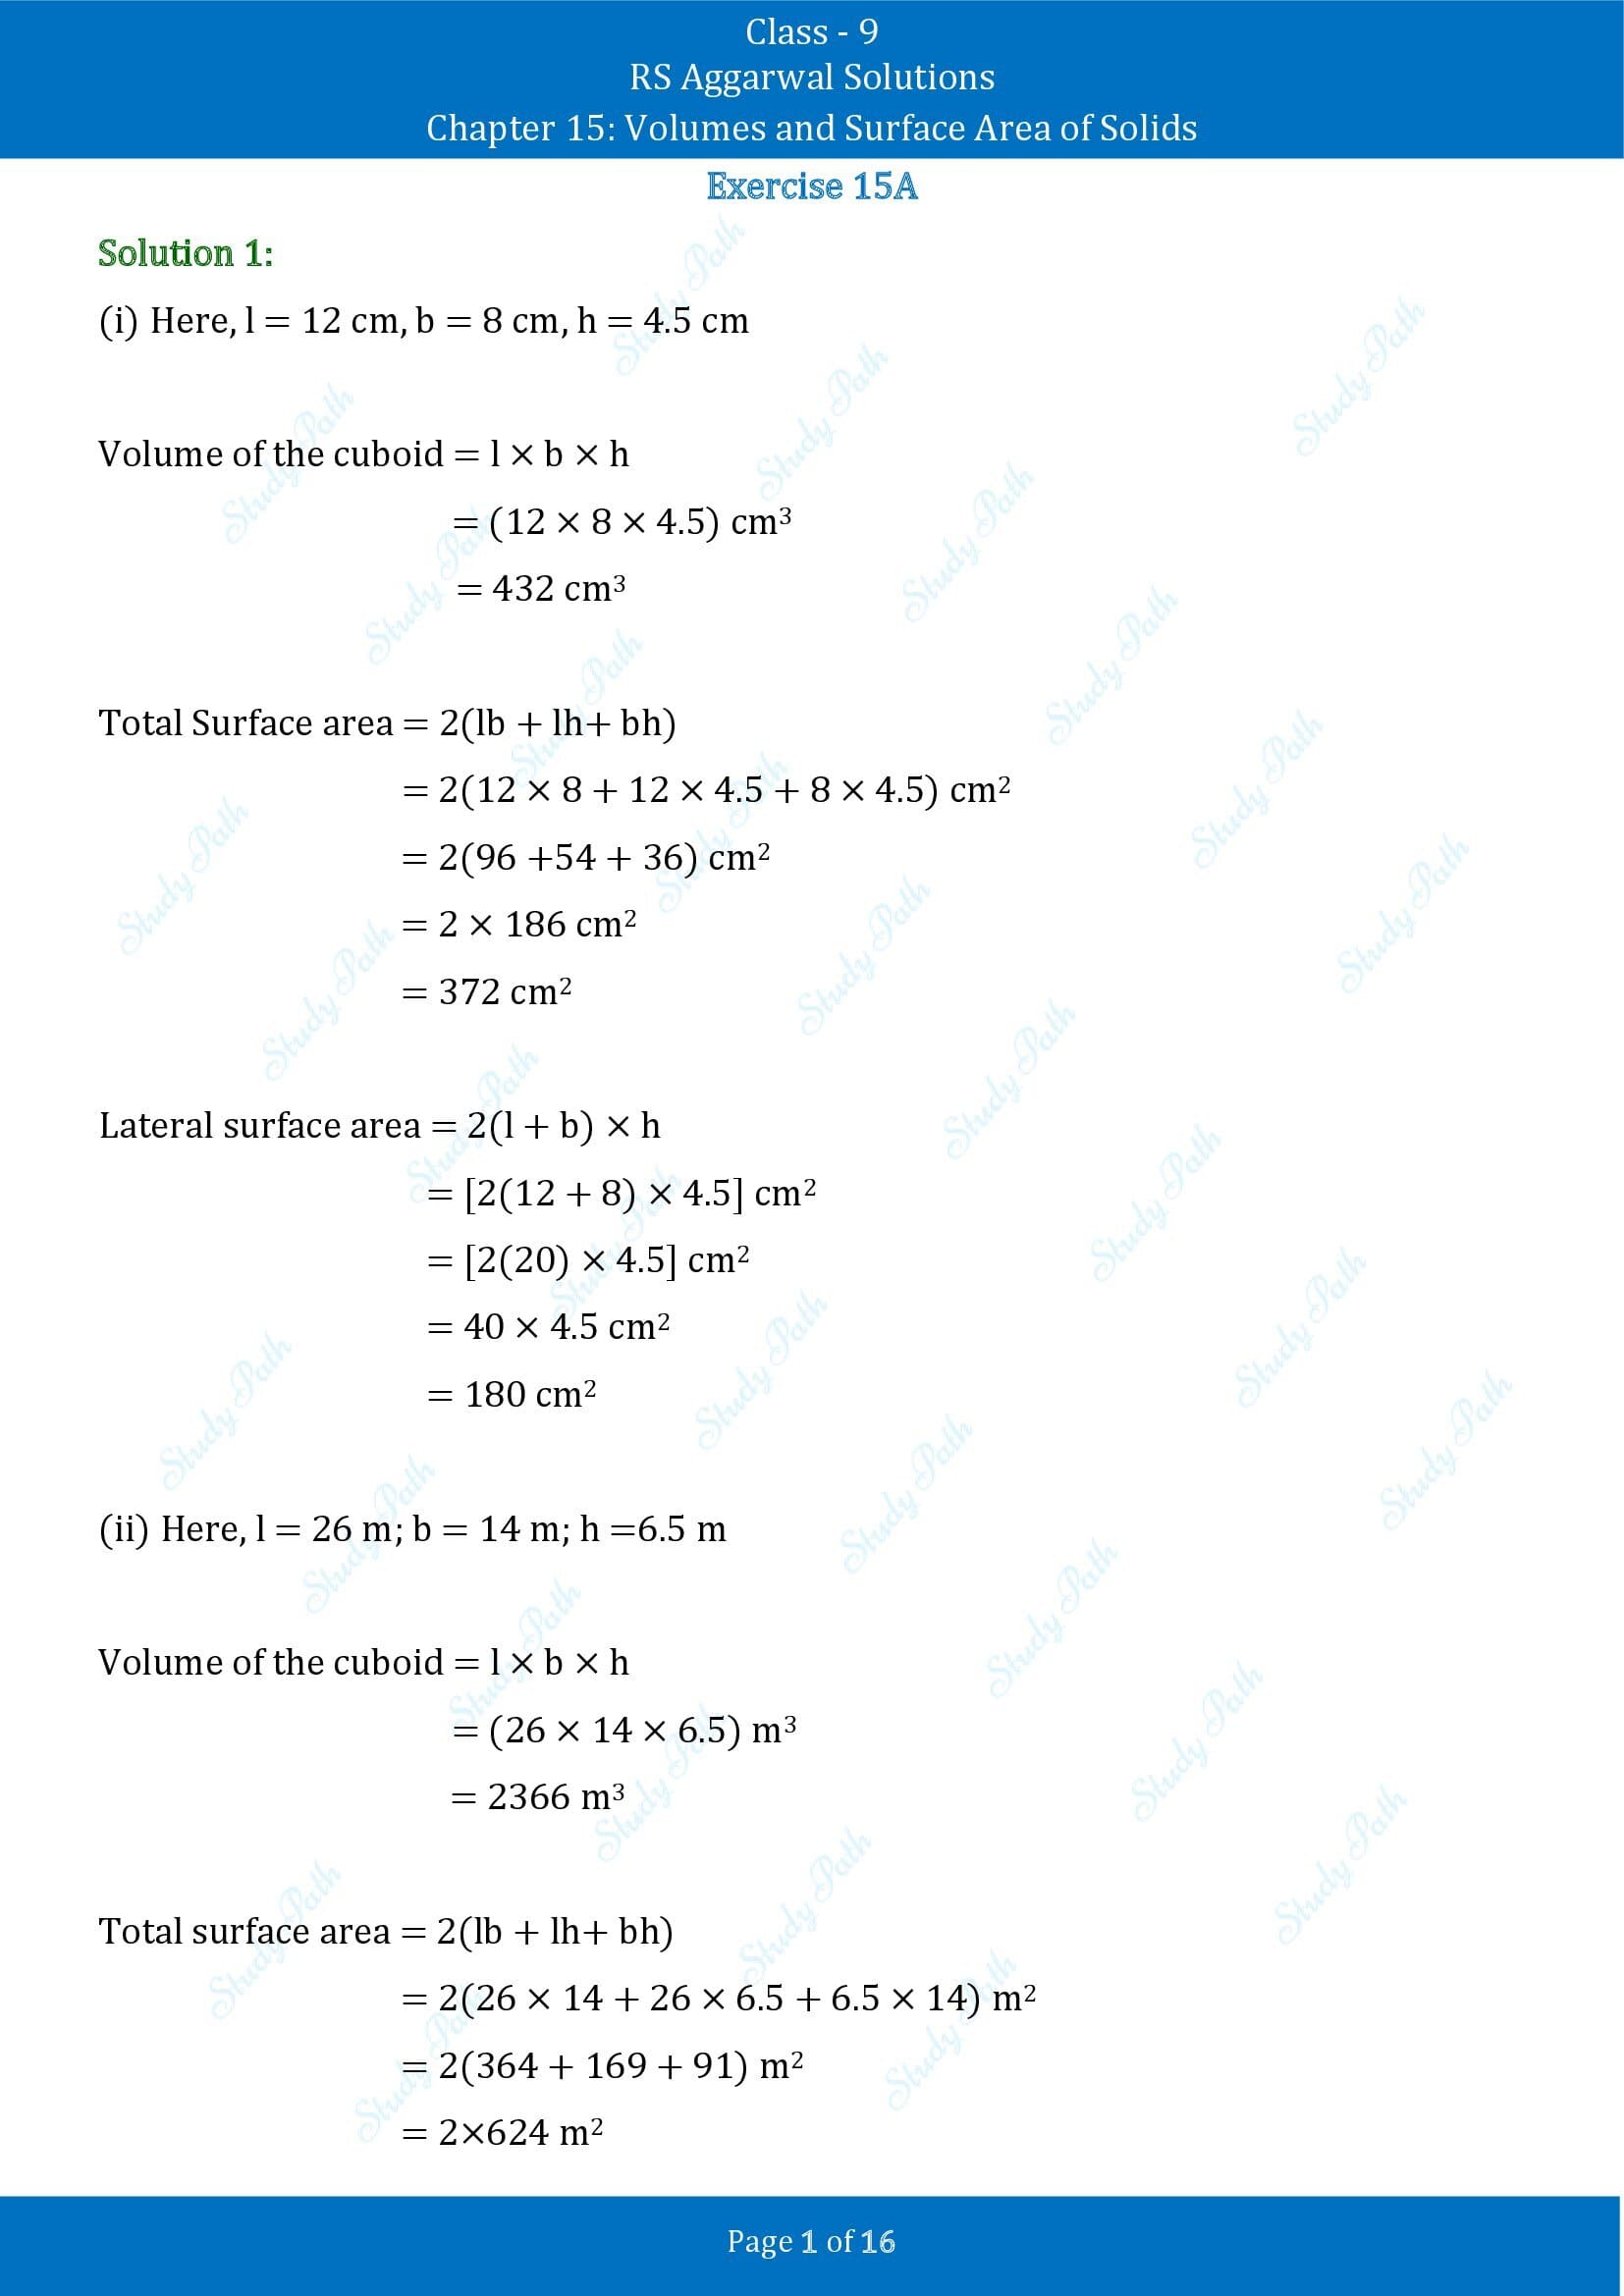 RS Aggarwal Solutions Class 9 Chapter 15 Volumes and Surface Area of Solids Exercise 15A 00001